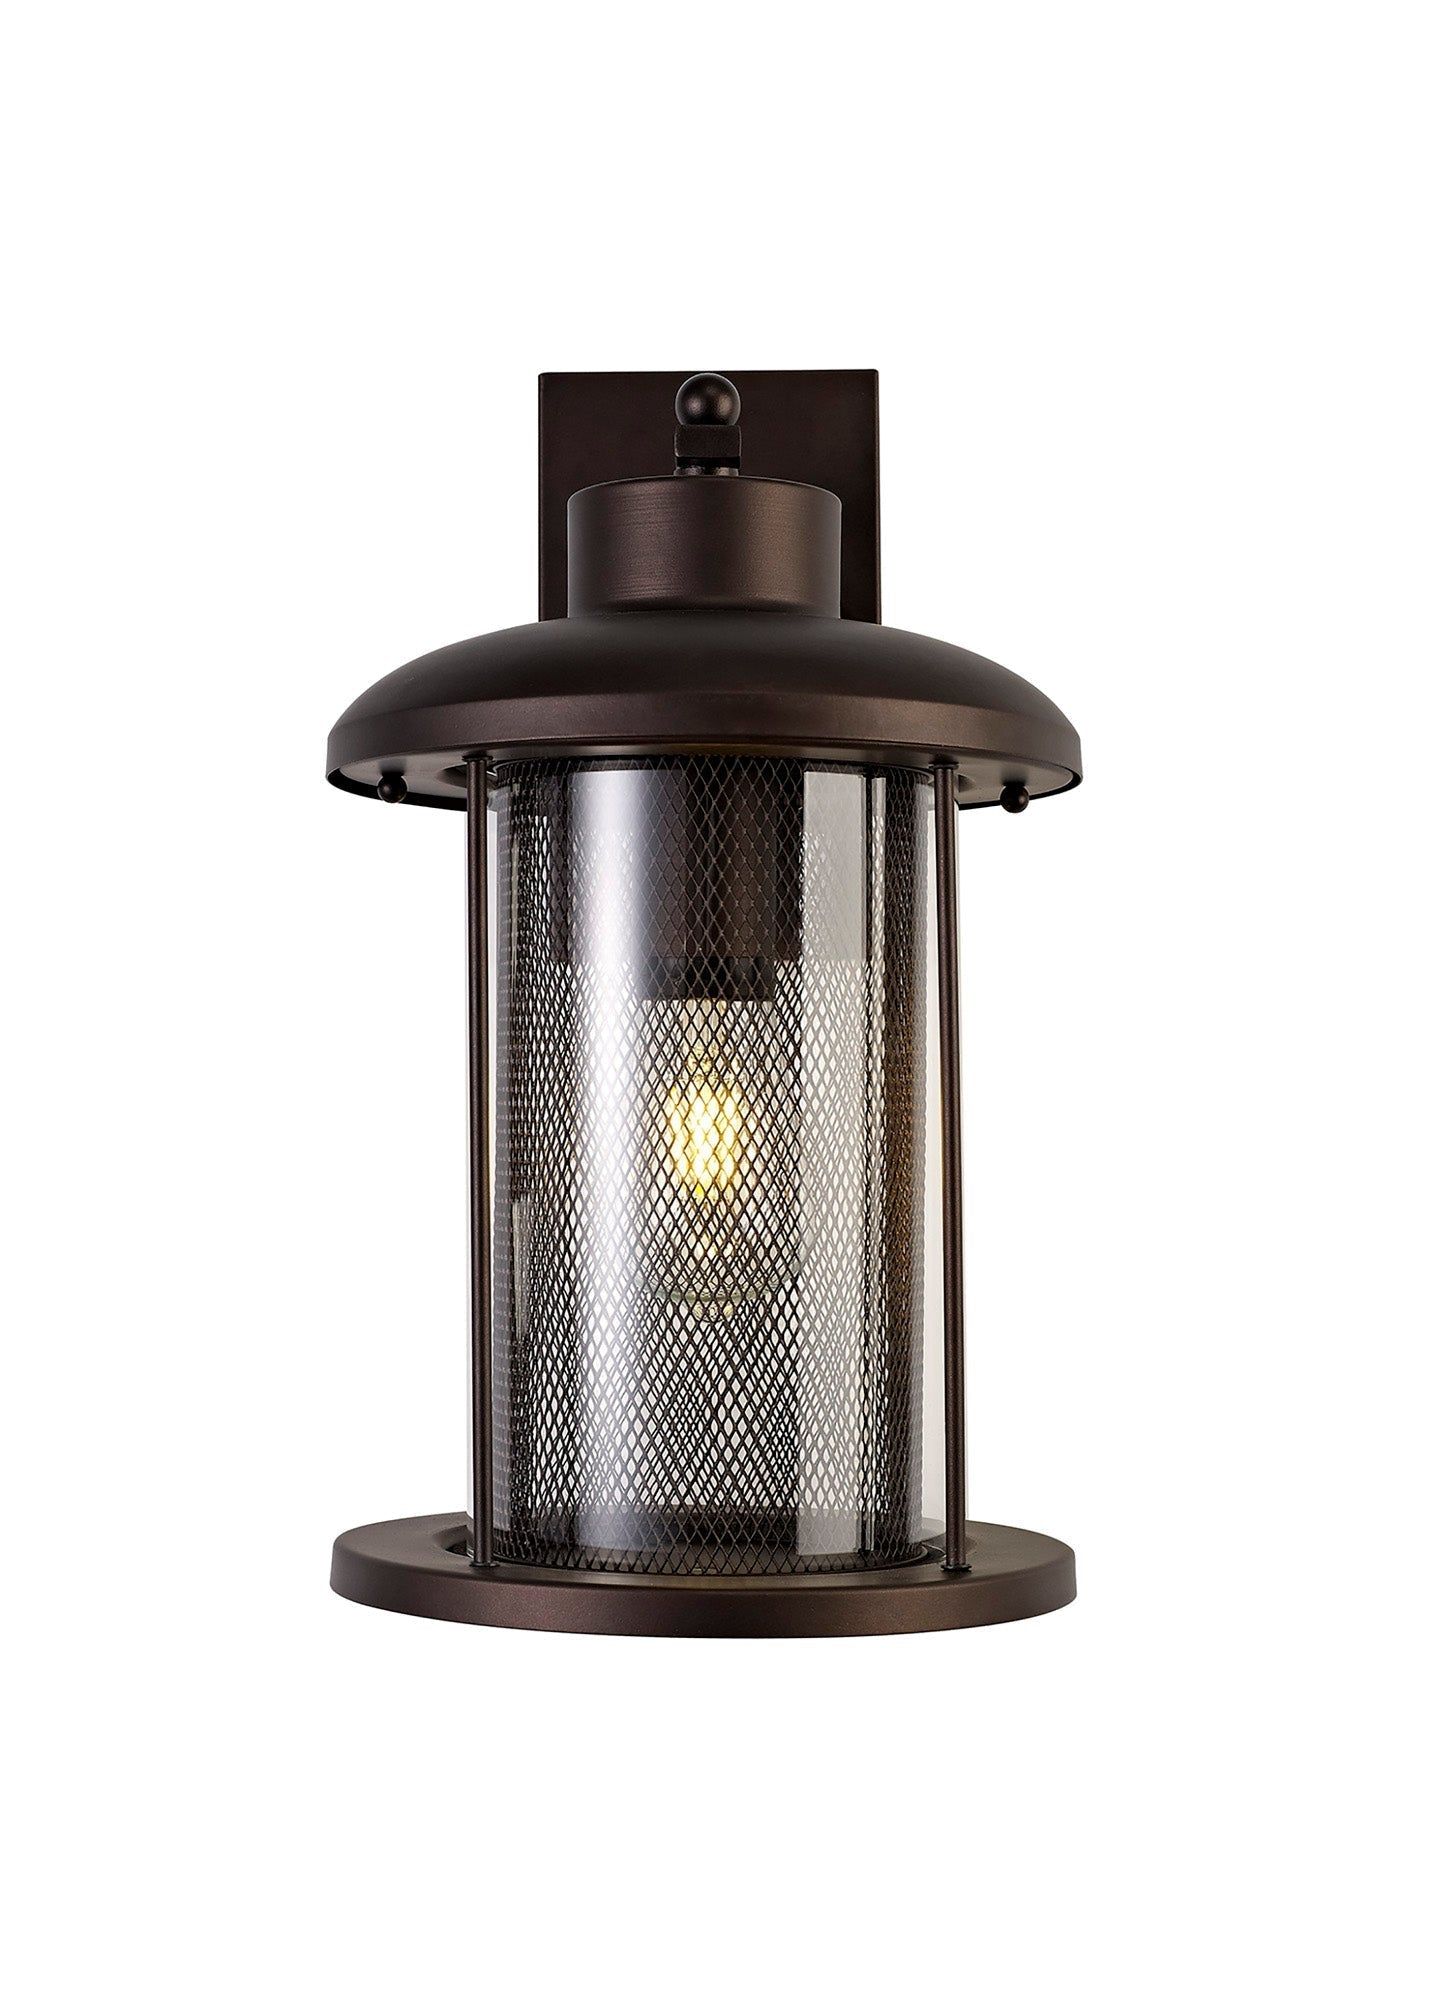 Turbo Extra Large/Large/Small Wall Lamp, Antique Bronze/Clear Glass, IP54, 2yrs Warranty